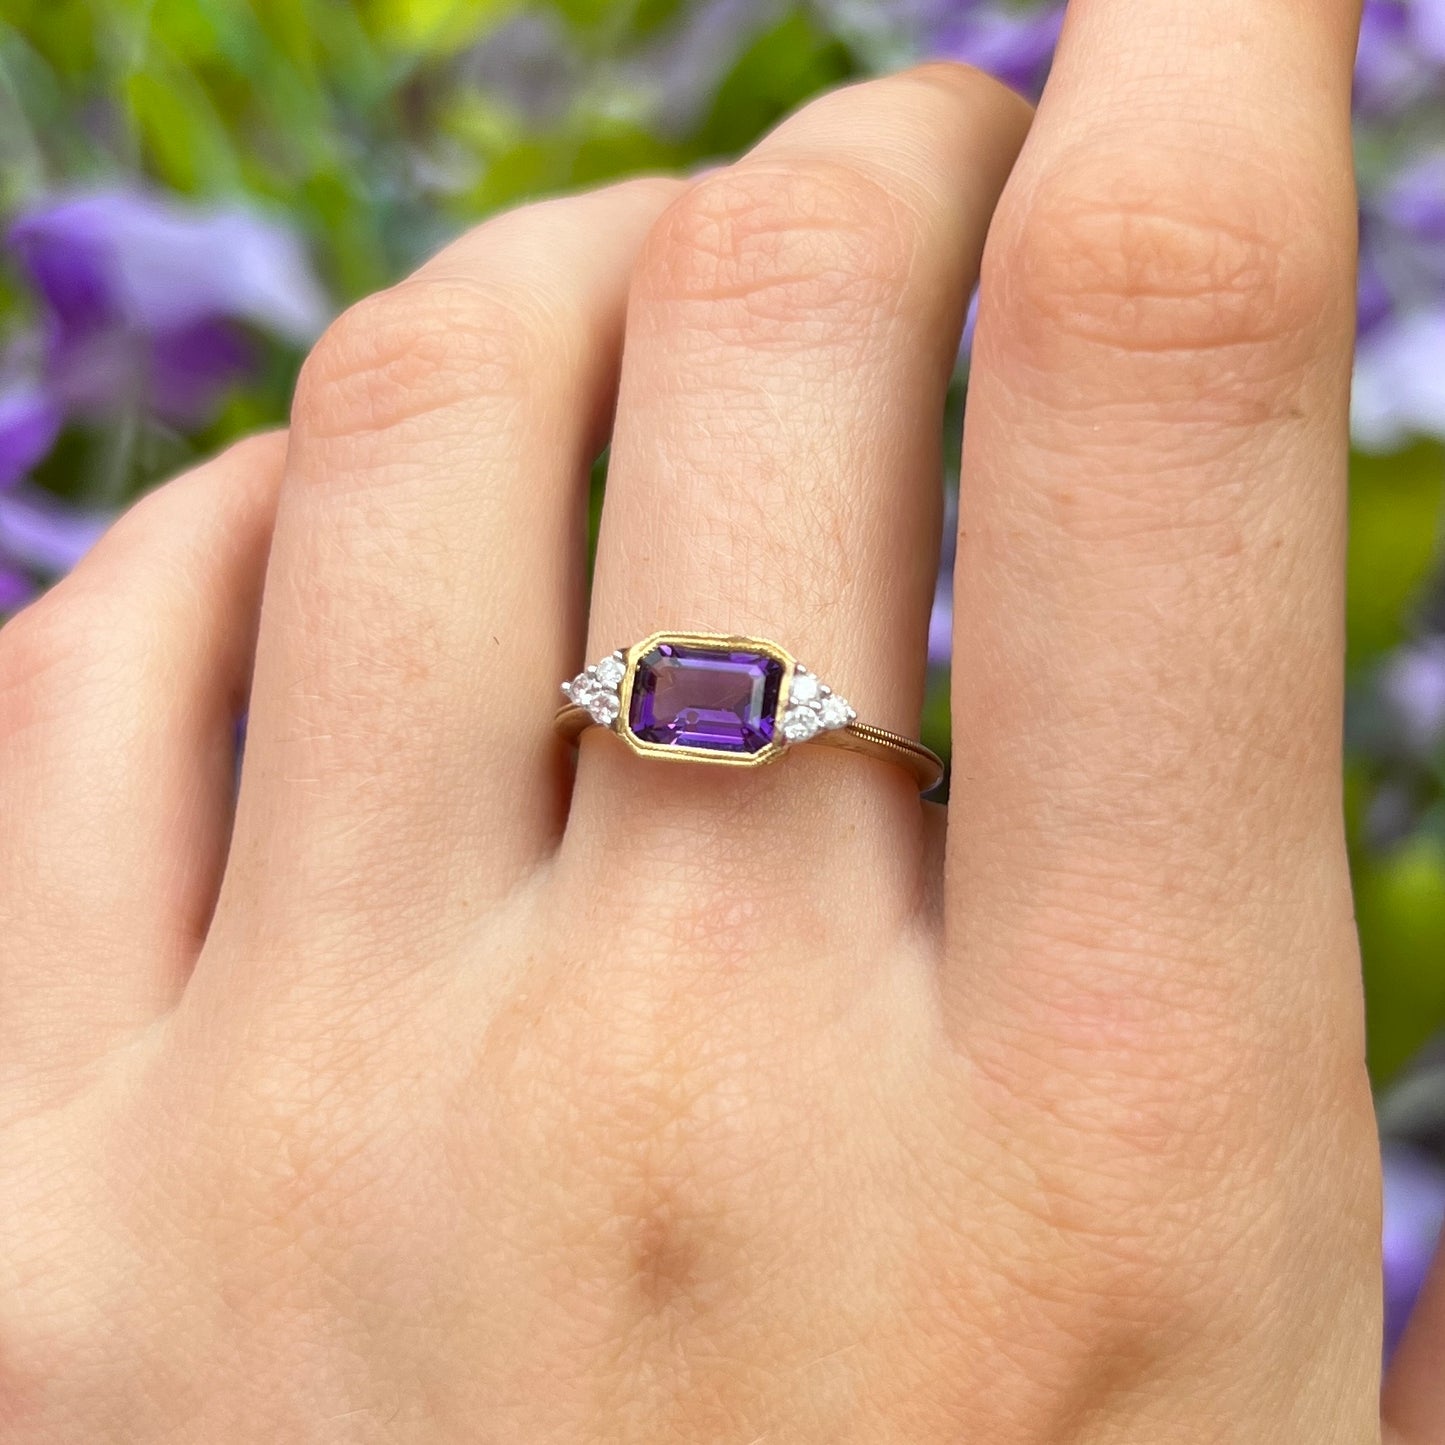 9ct Yellow Gold Amethyst and Diamond Ring - Size M 1/2